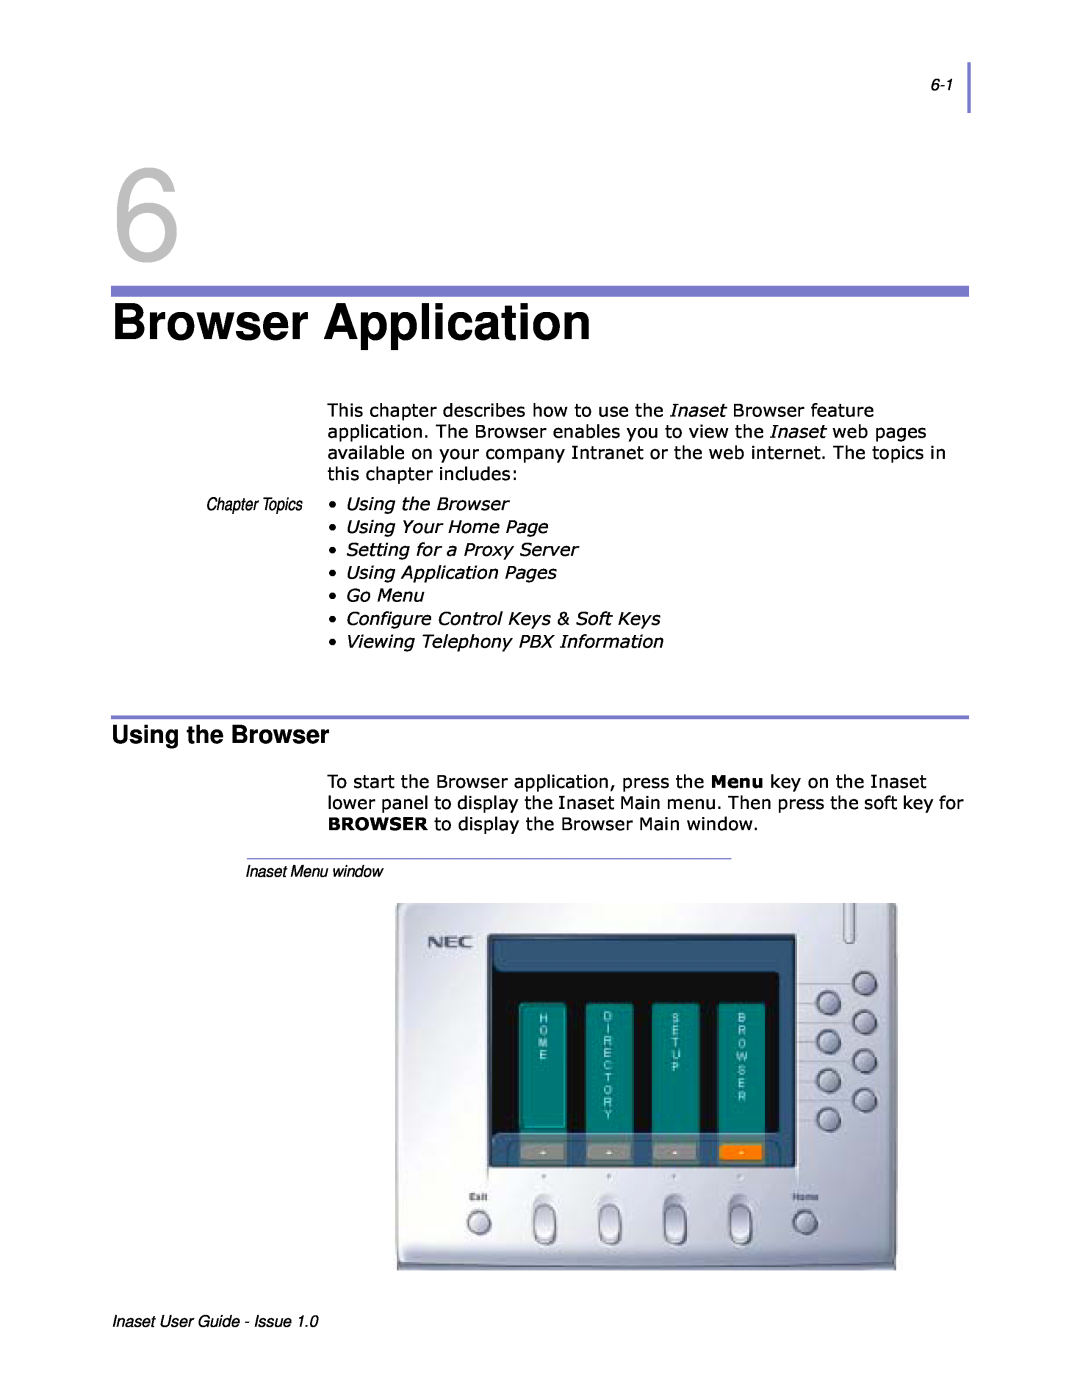 NEC NEAX 2000 IPS manual Browser Application, Using the Browser, Wklvfkdswhulqfoxghv, Inaset Menu window 